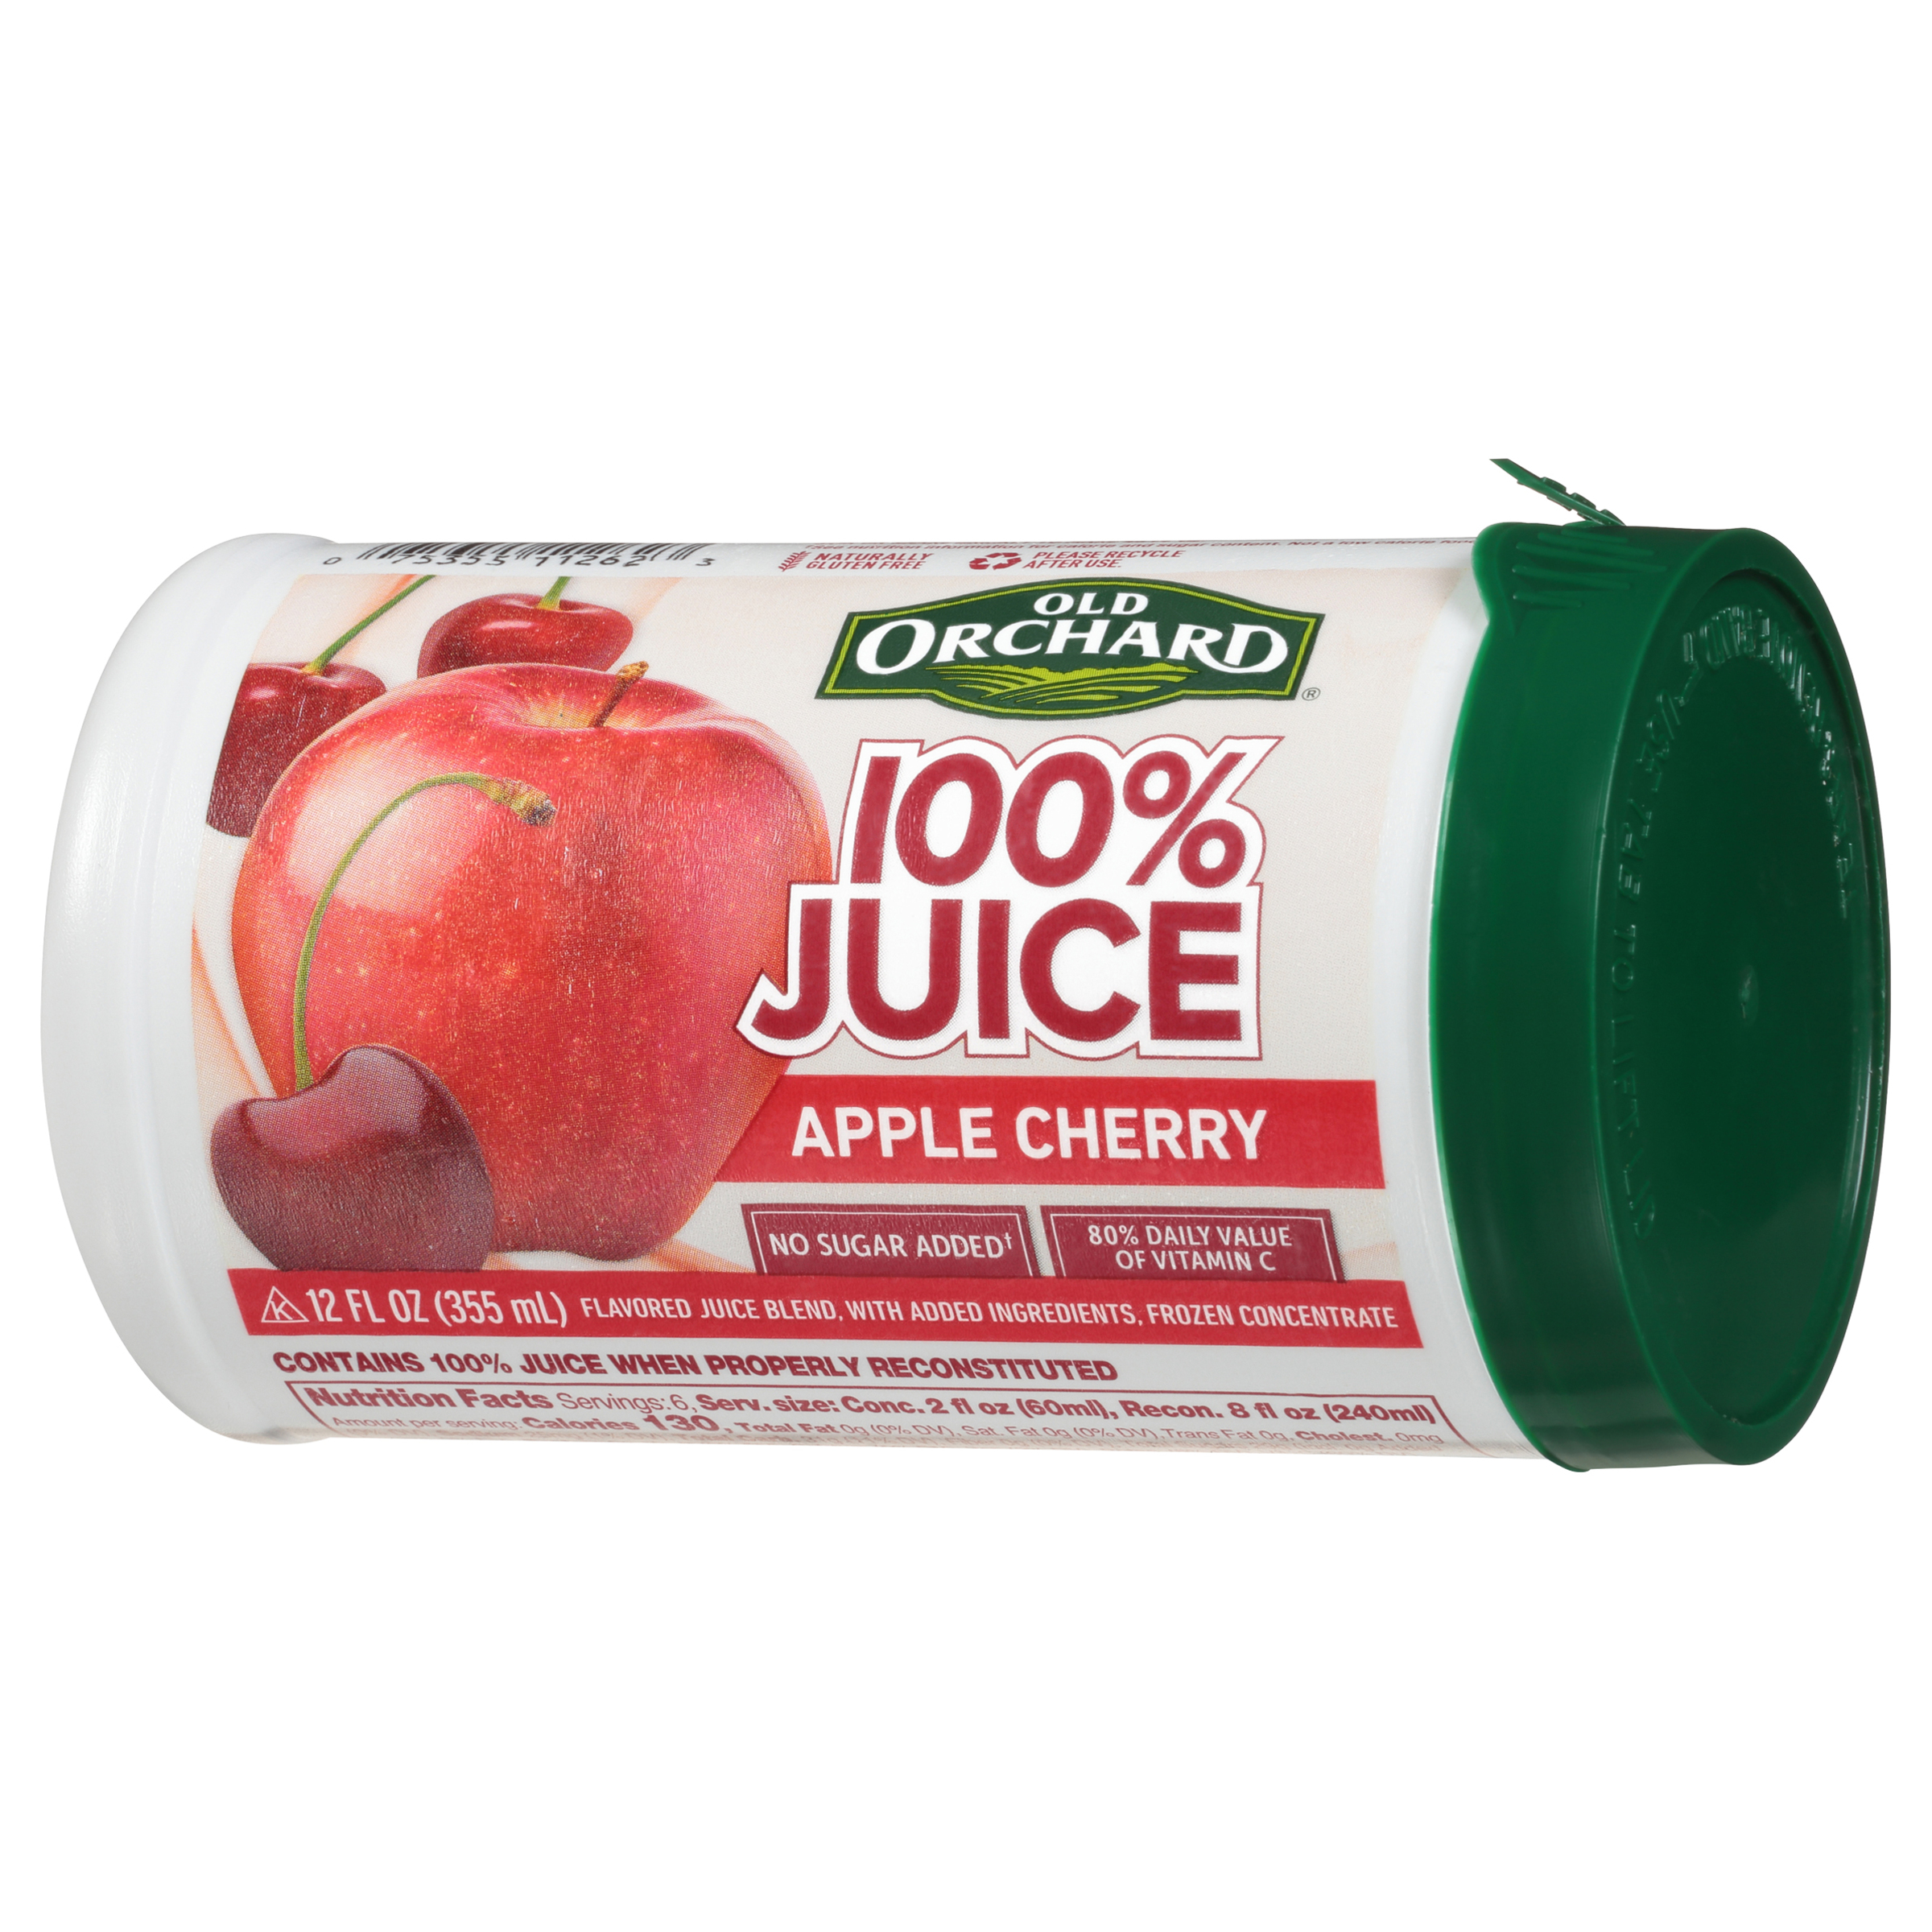 Old Orchard Apple Cherry Flavored 100% Juice Blend, 12 oz Frozen Concentrate - image 2 of 7